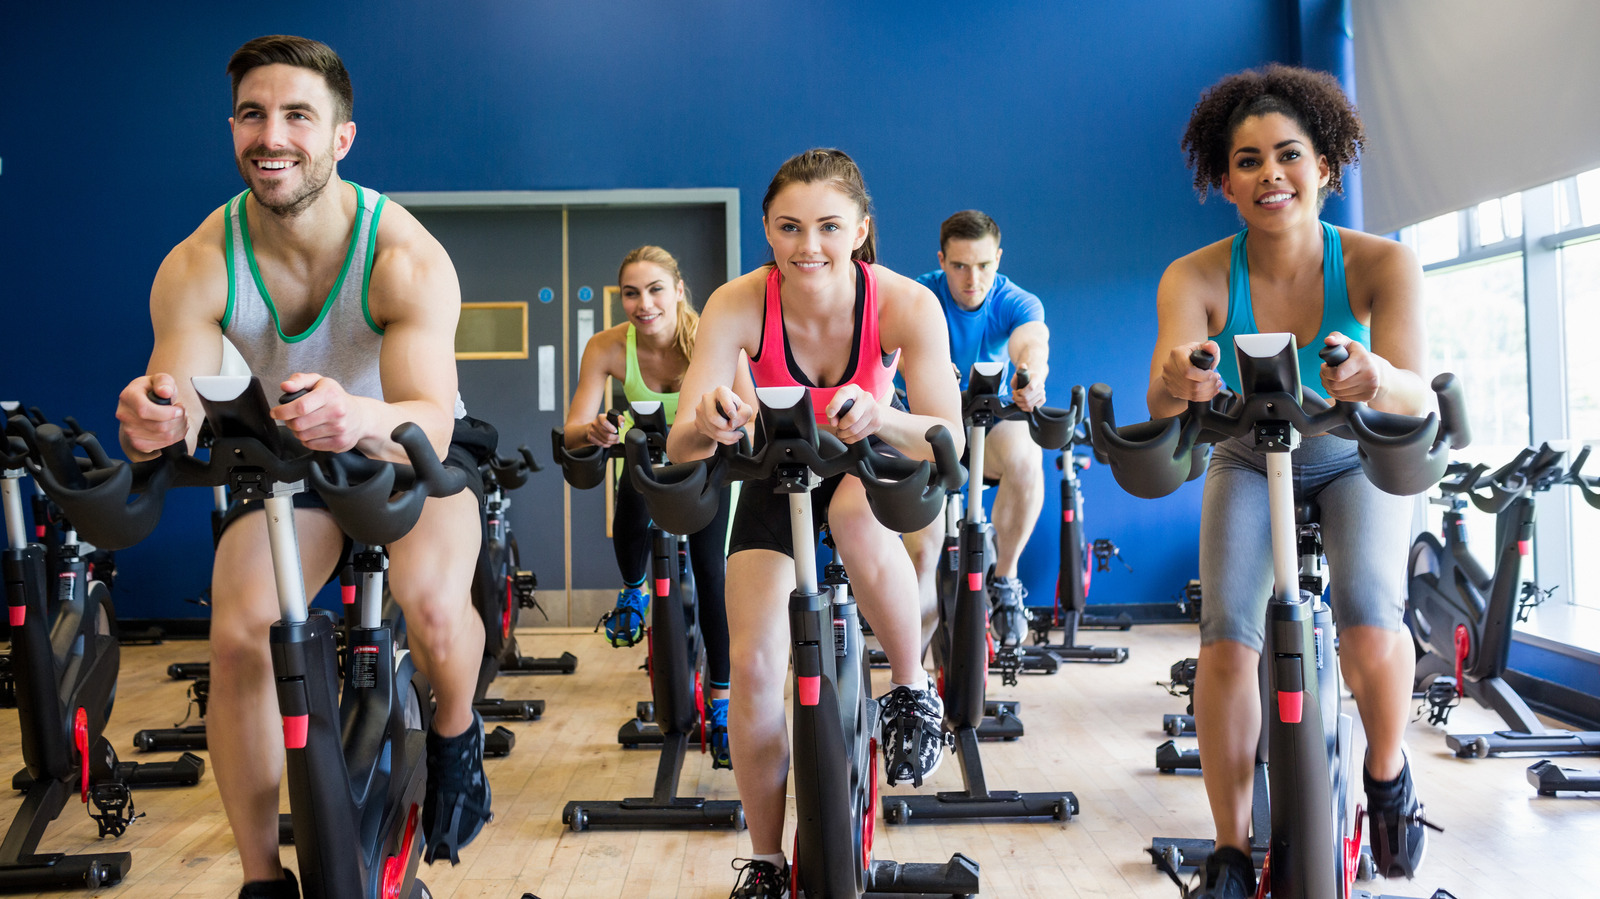 Spinning: How to find the right course